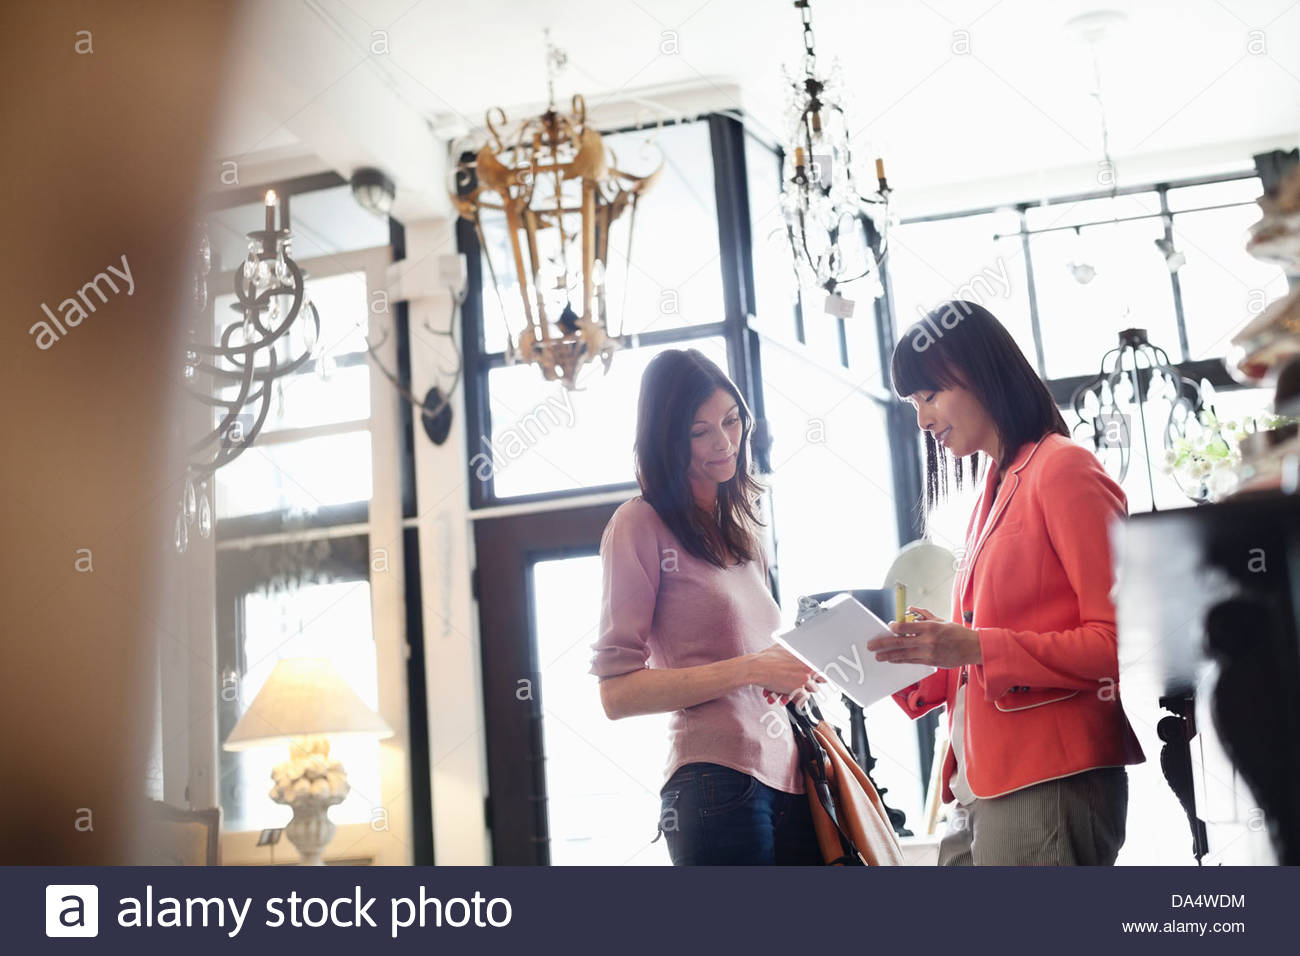 Female business owner helping customer at furniture store Stock Photo